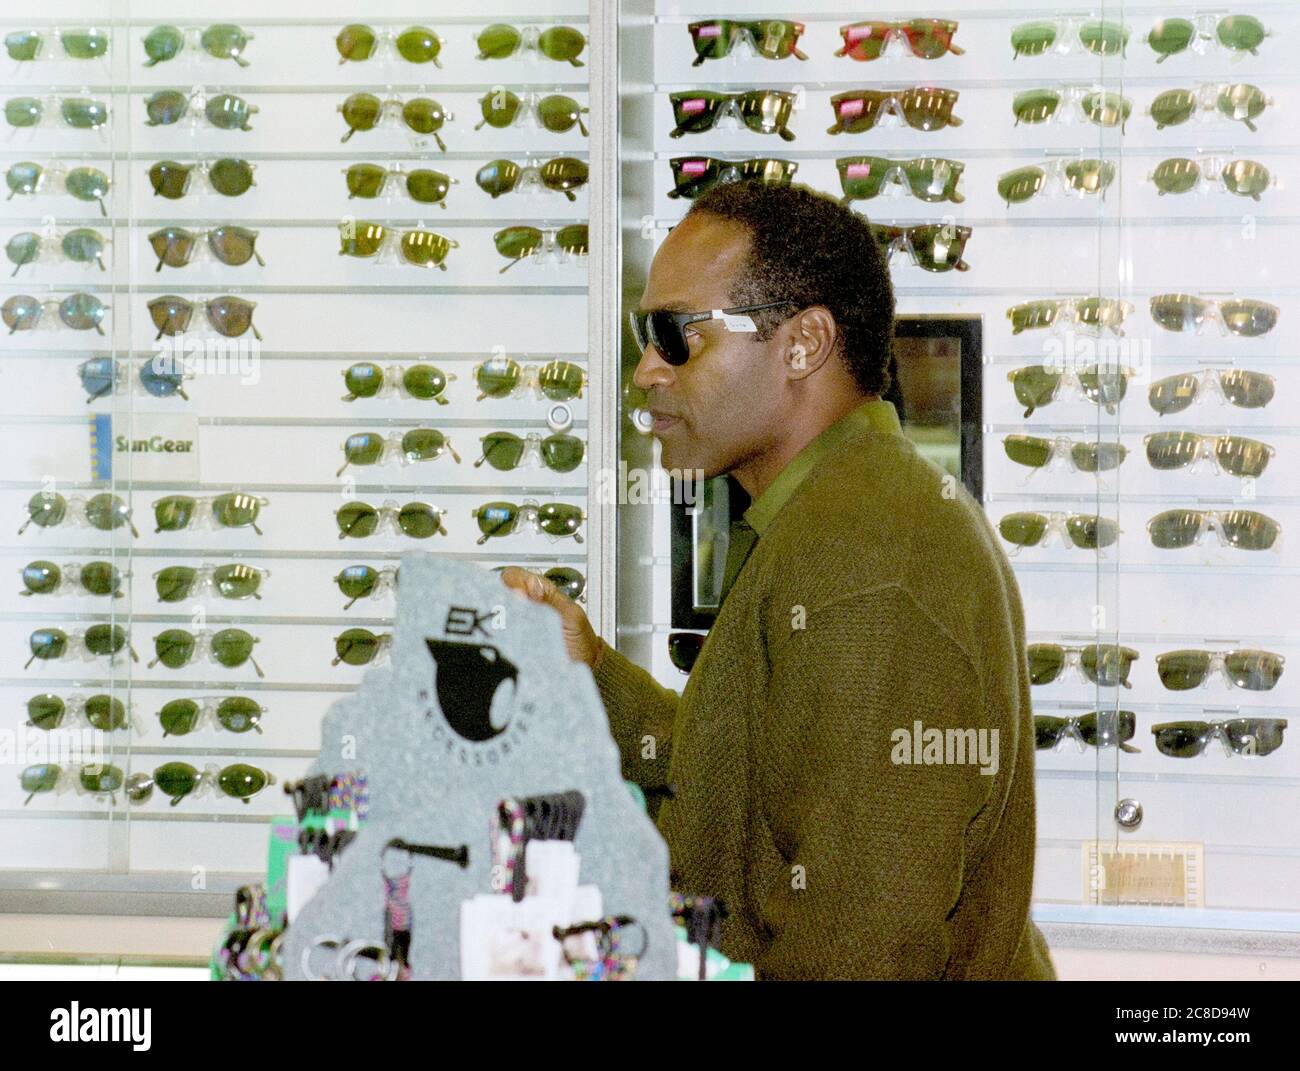 Former professional American football player O J Simpson shopping for sunglasses at London's Heathrow Airport in 1996 following a publicity tour in the U.K. after his acquittal of the murders of his former wife, Nicole Brown Simpson, and her friend, Ron Goldman in 1996. Stock Photo